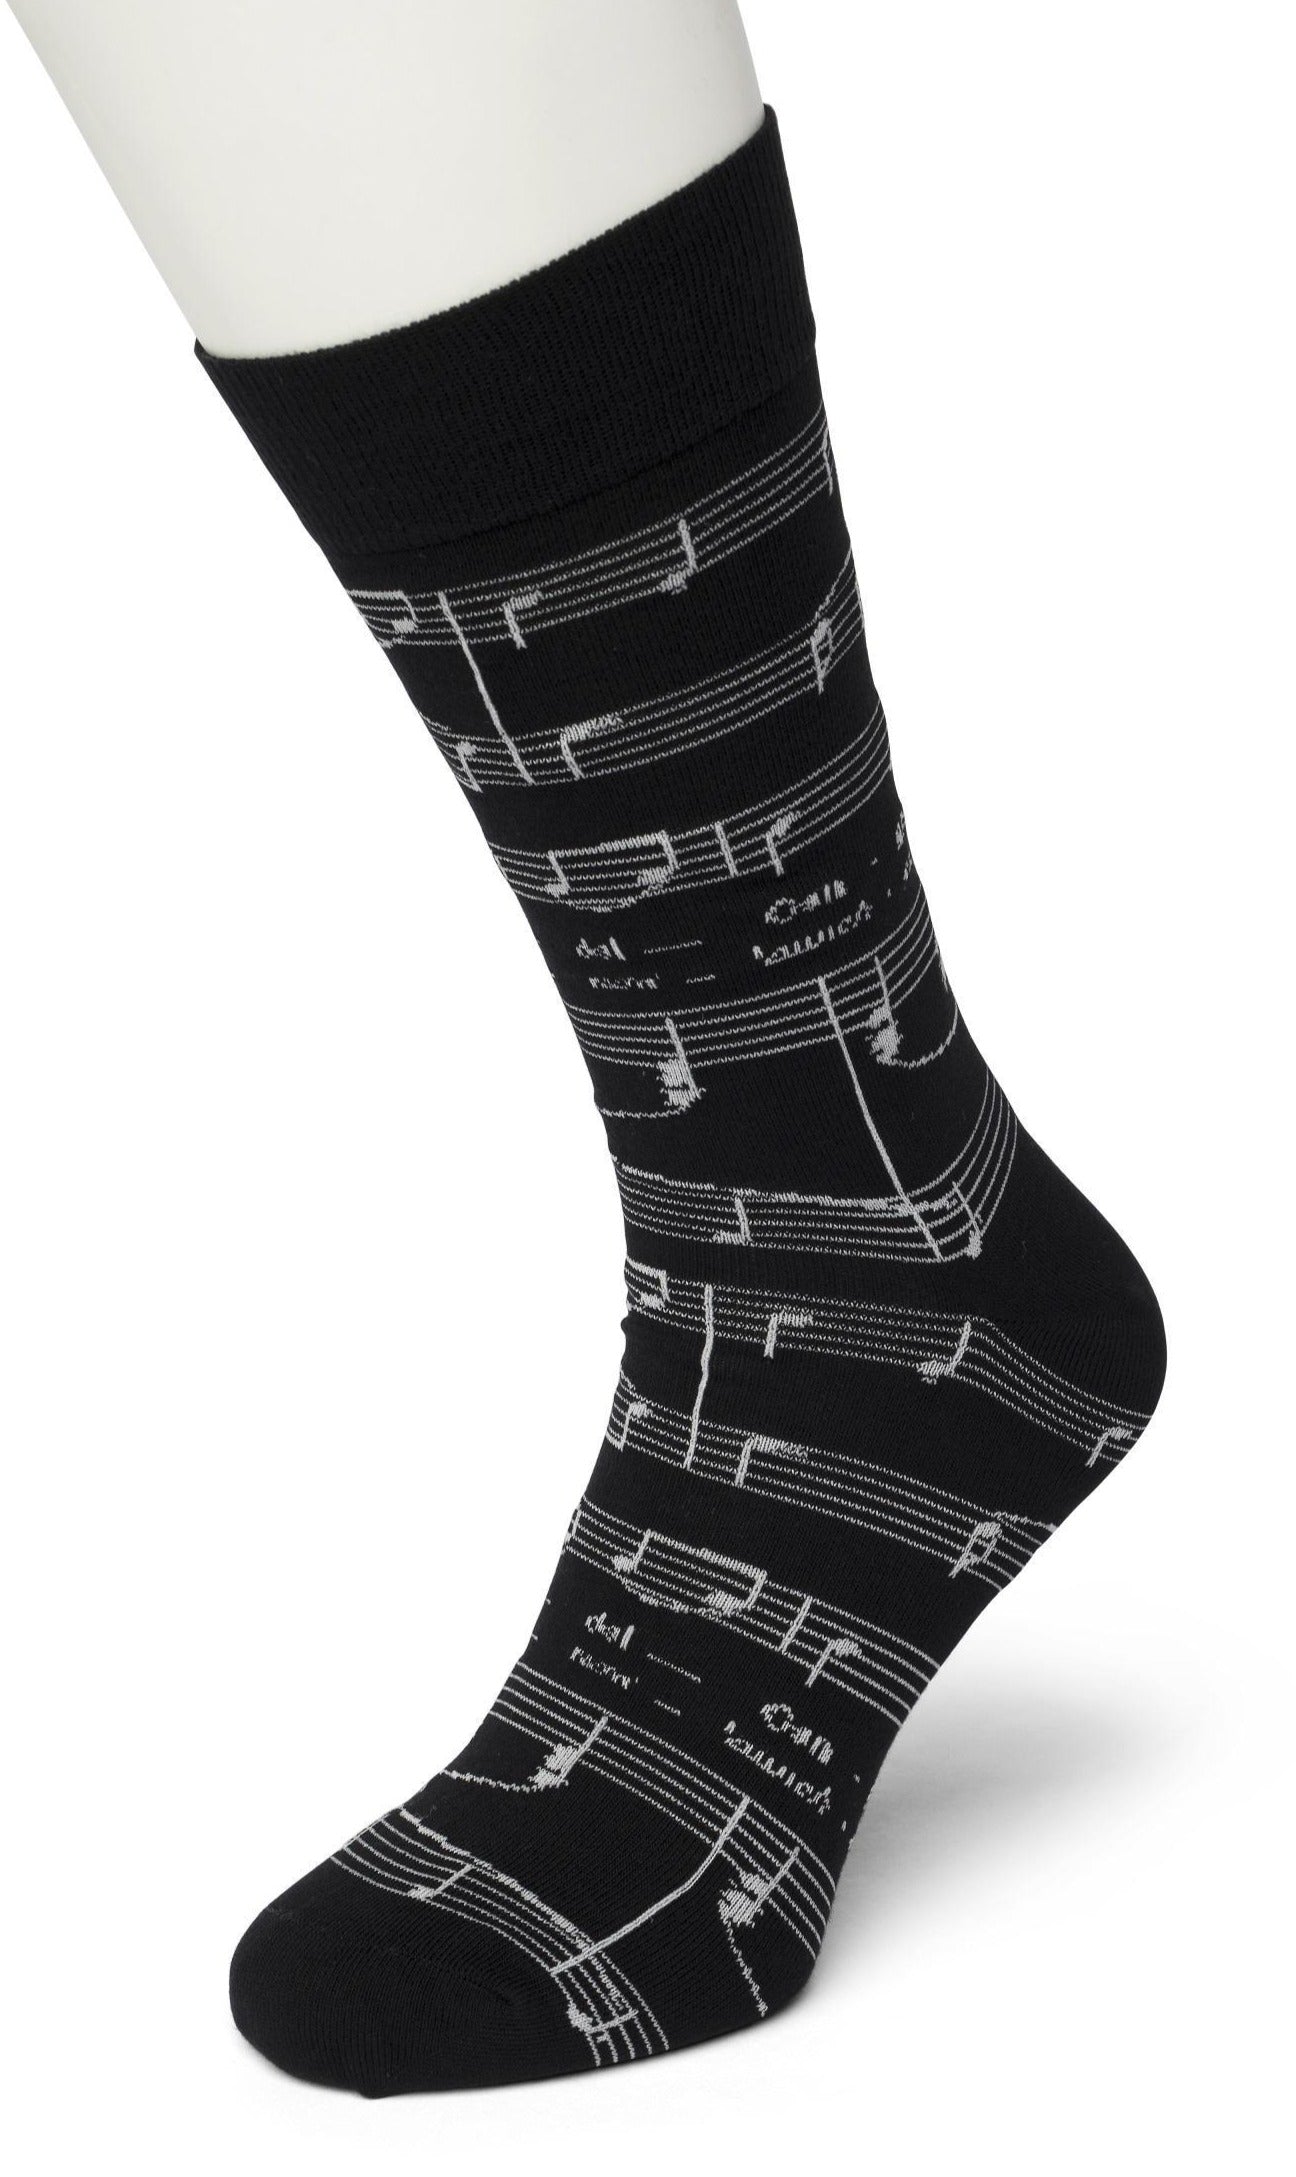 Bonnie Doon Brillante Sock - Black cotton mix ankle socks with a woven white music notes pattern. Available in men and women's sizes